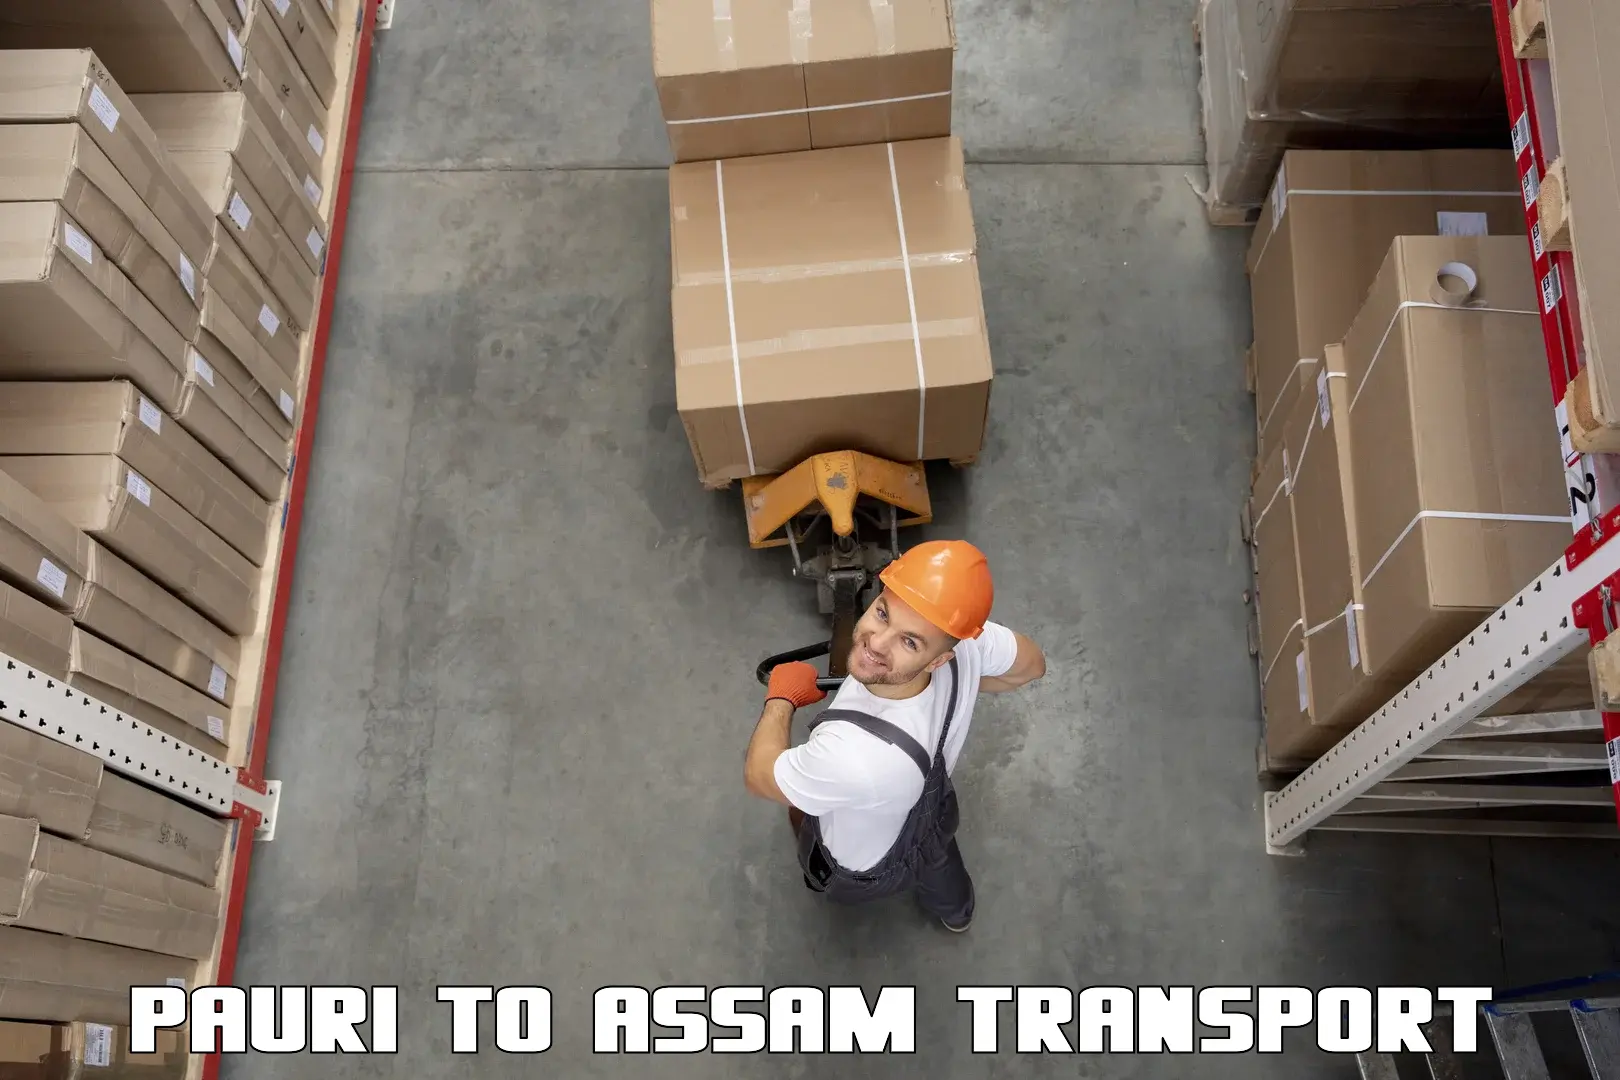 Delivery service Pauri to Assam